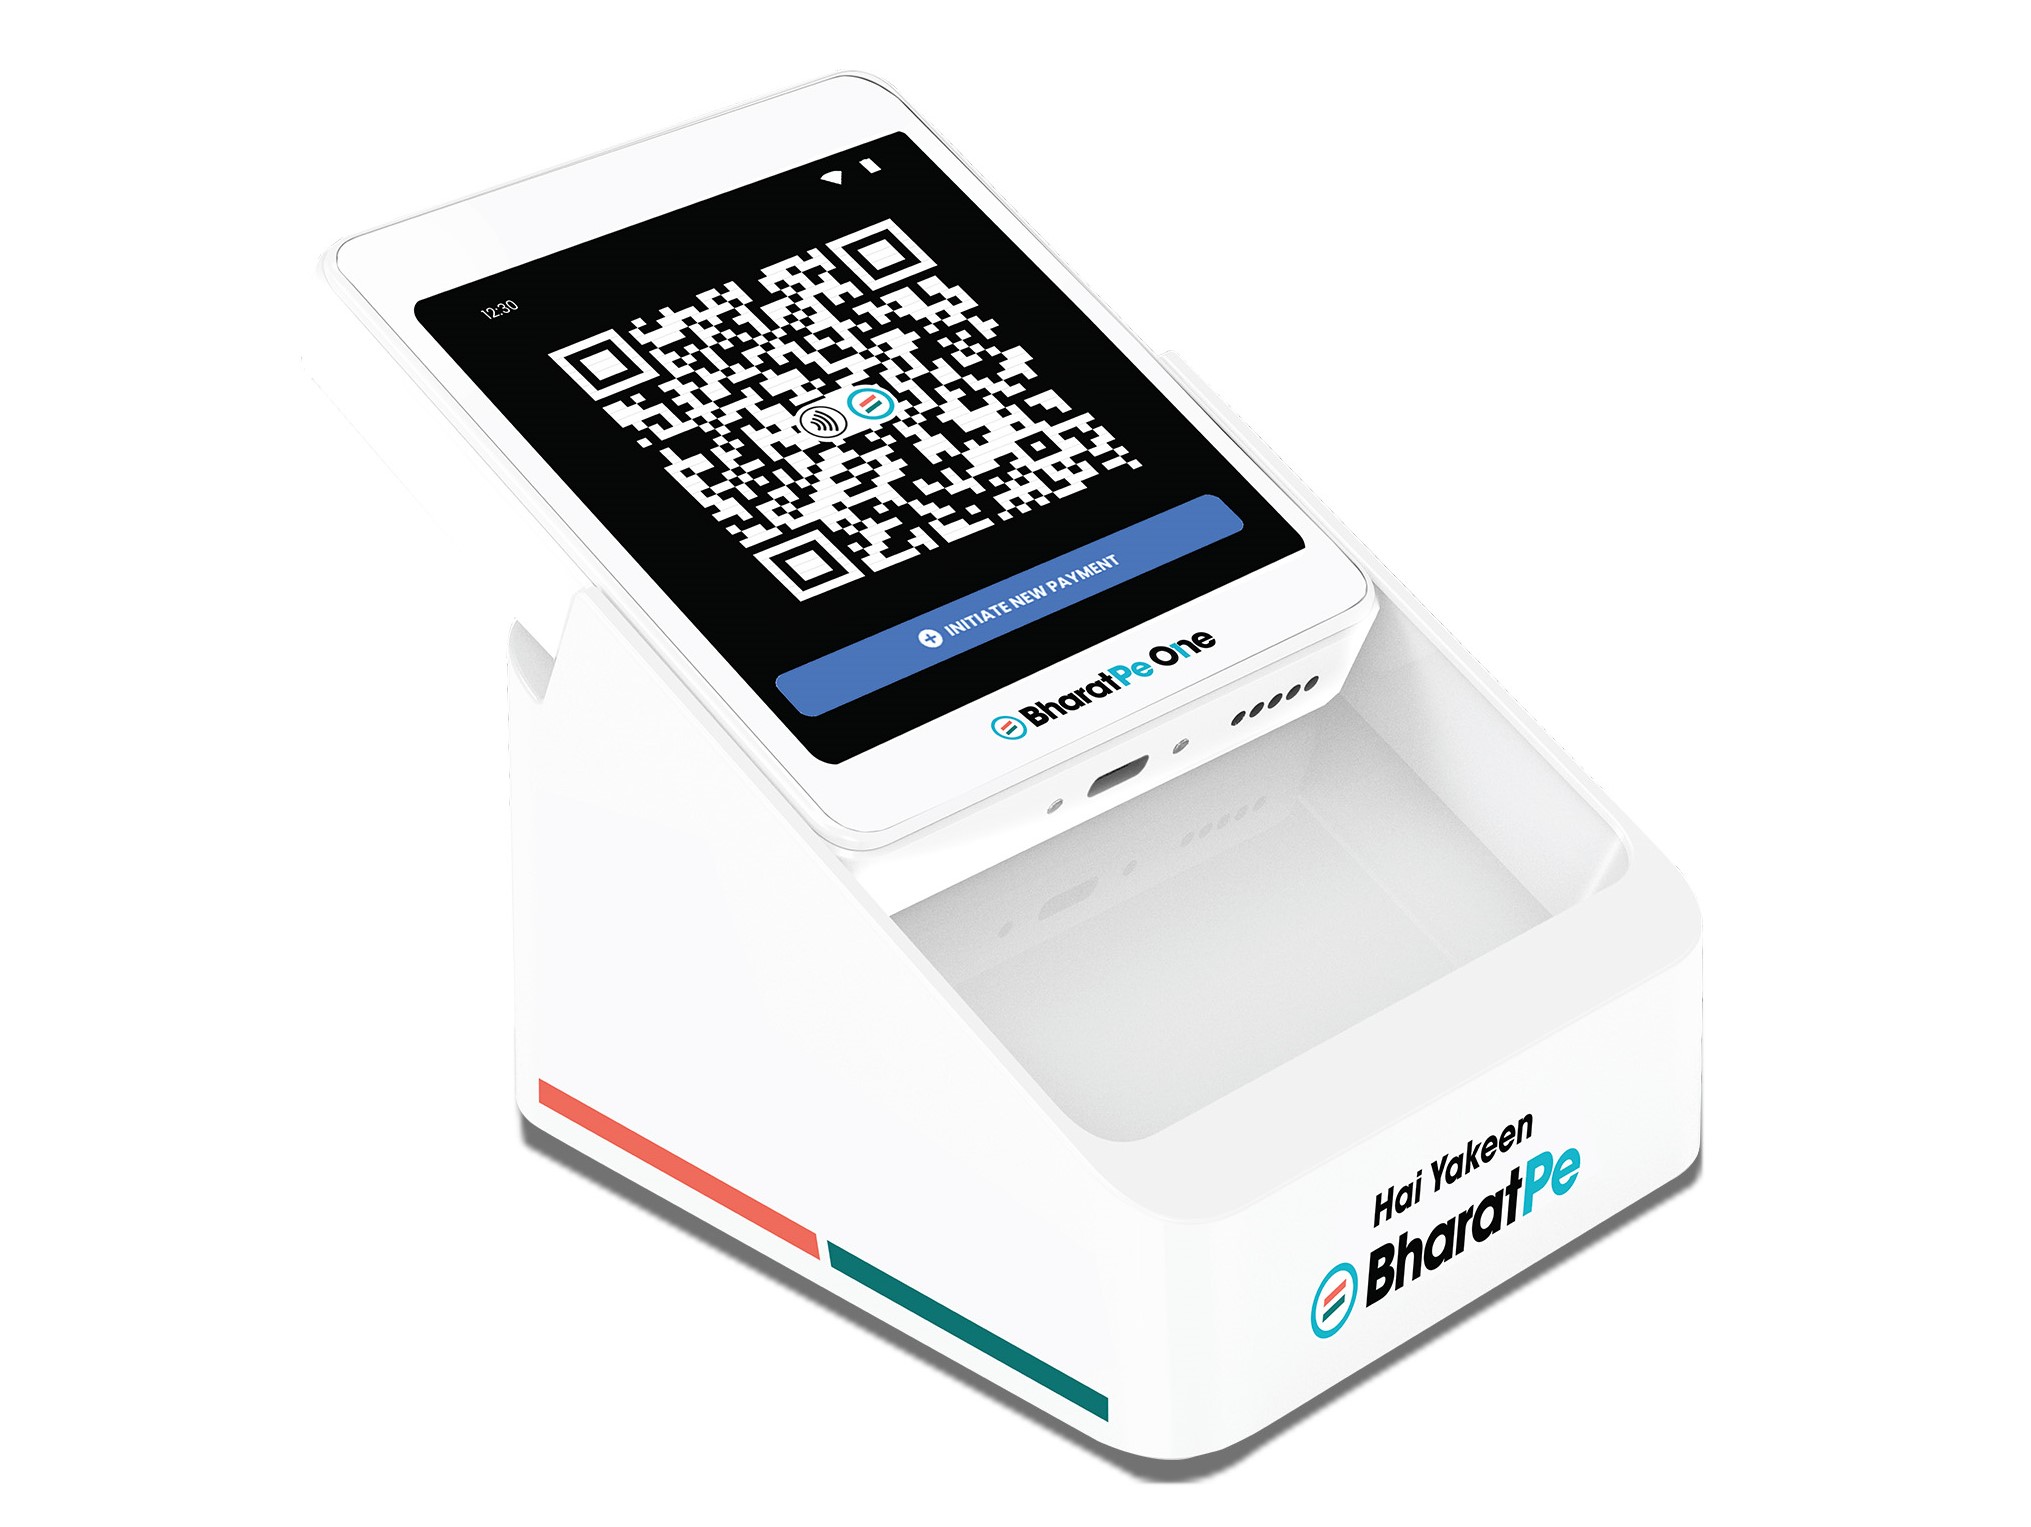 BharatPe launches BharatPe One, India’s first all-in-one payment device